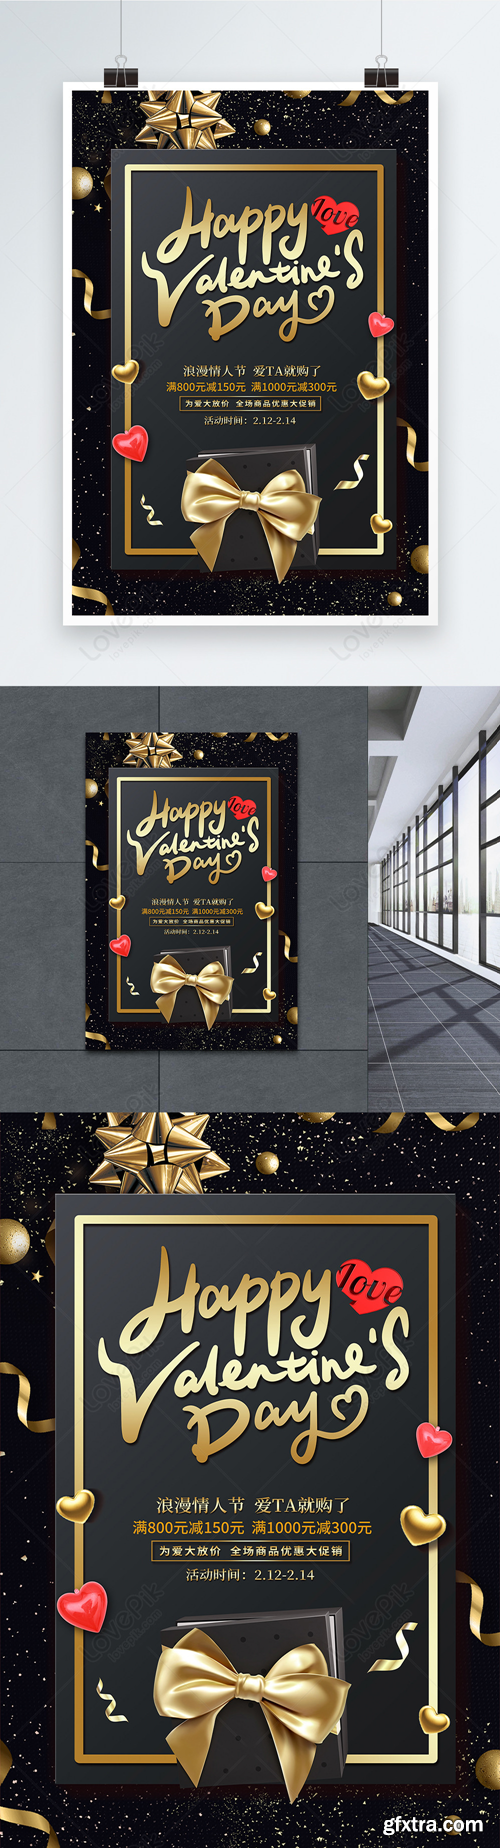 atmospheric black gold valentines day promotional posters